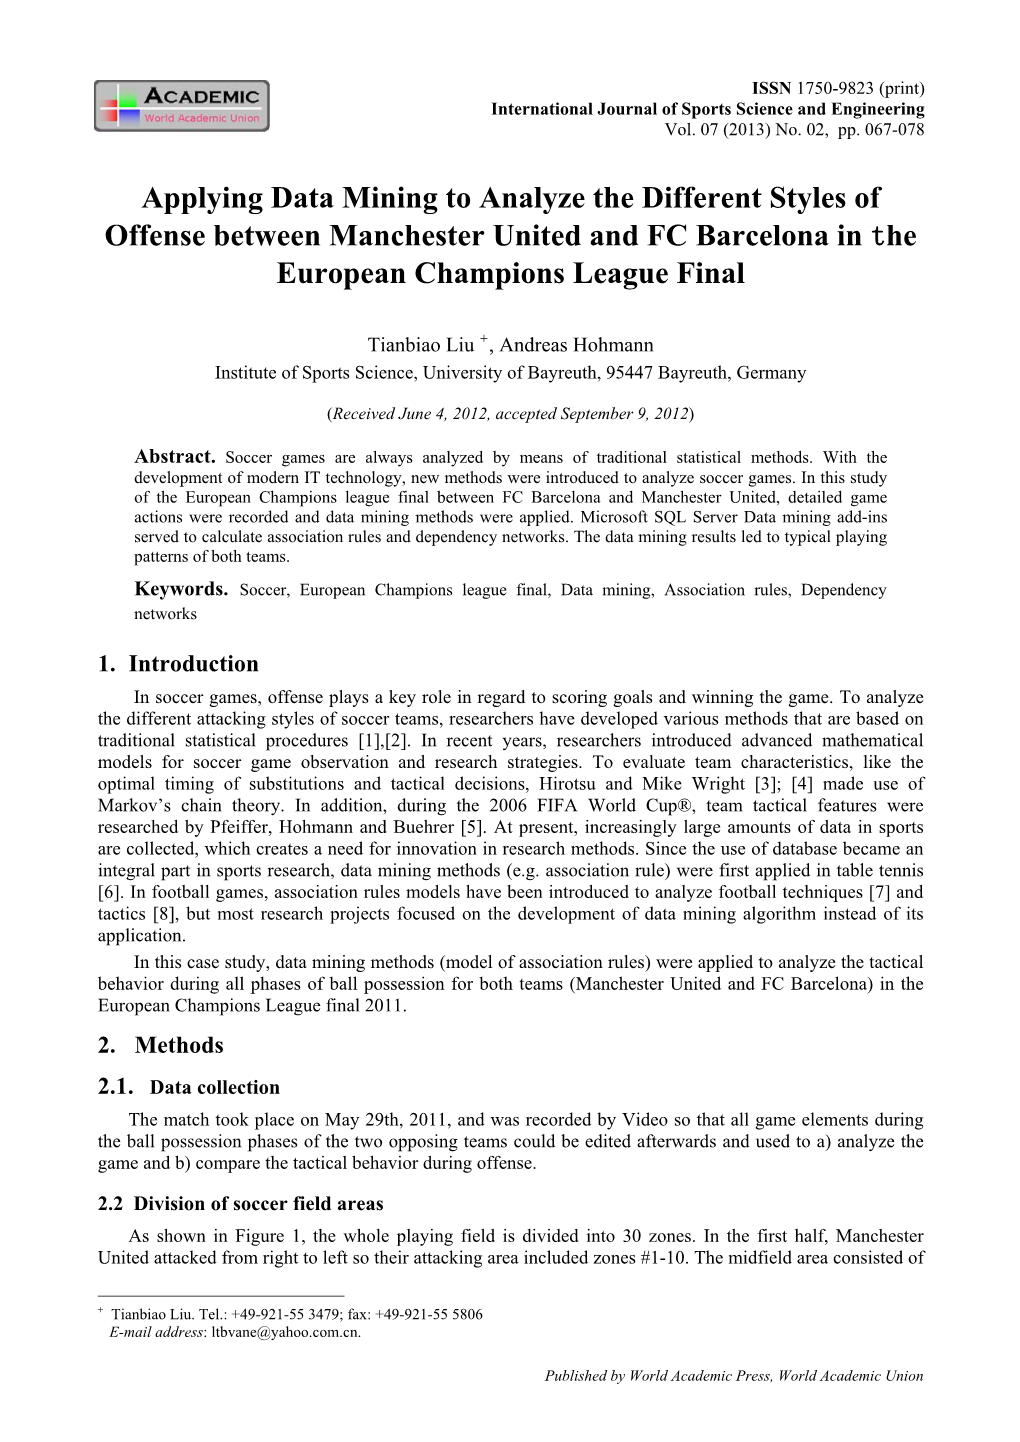 Applying Data Mining to Analyze the Different Styles of Offense Between Manchester United and FC Barcelona in the European Champions League Final